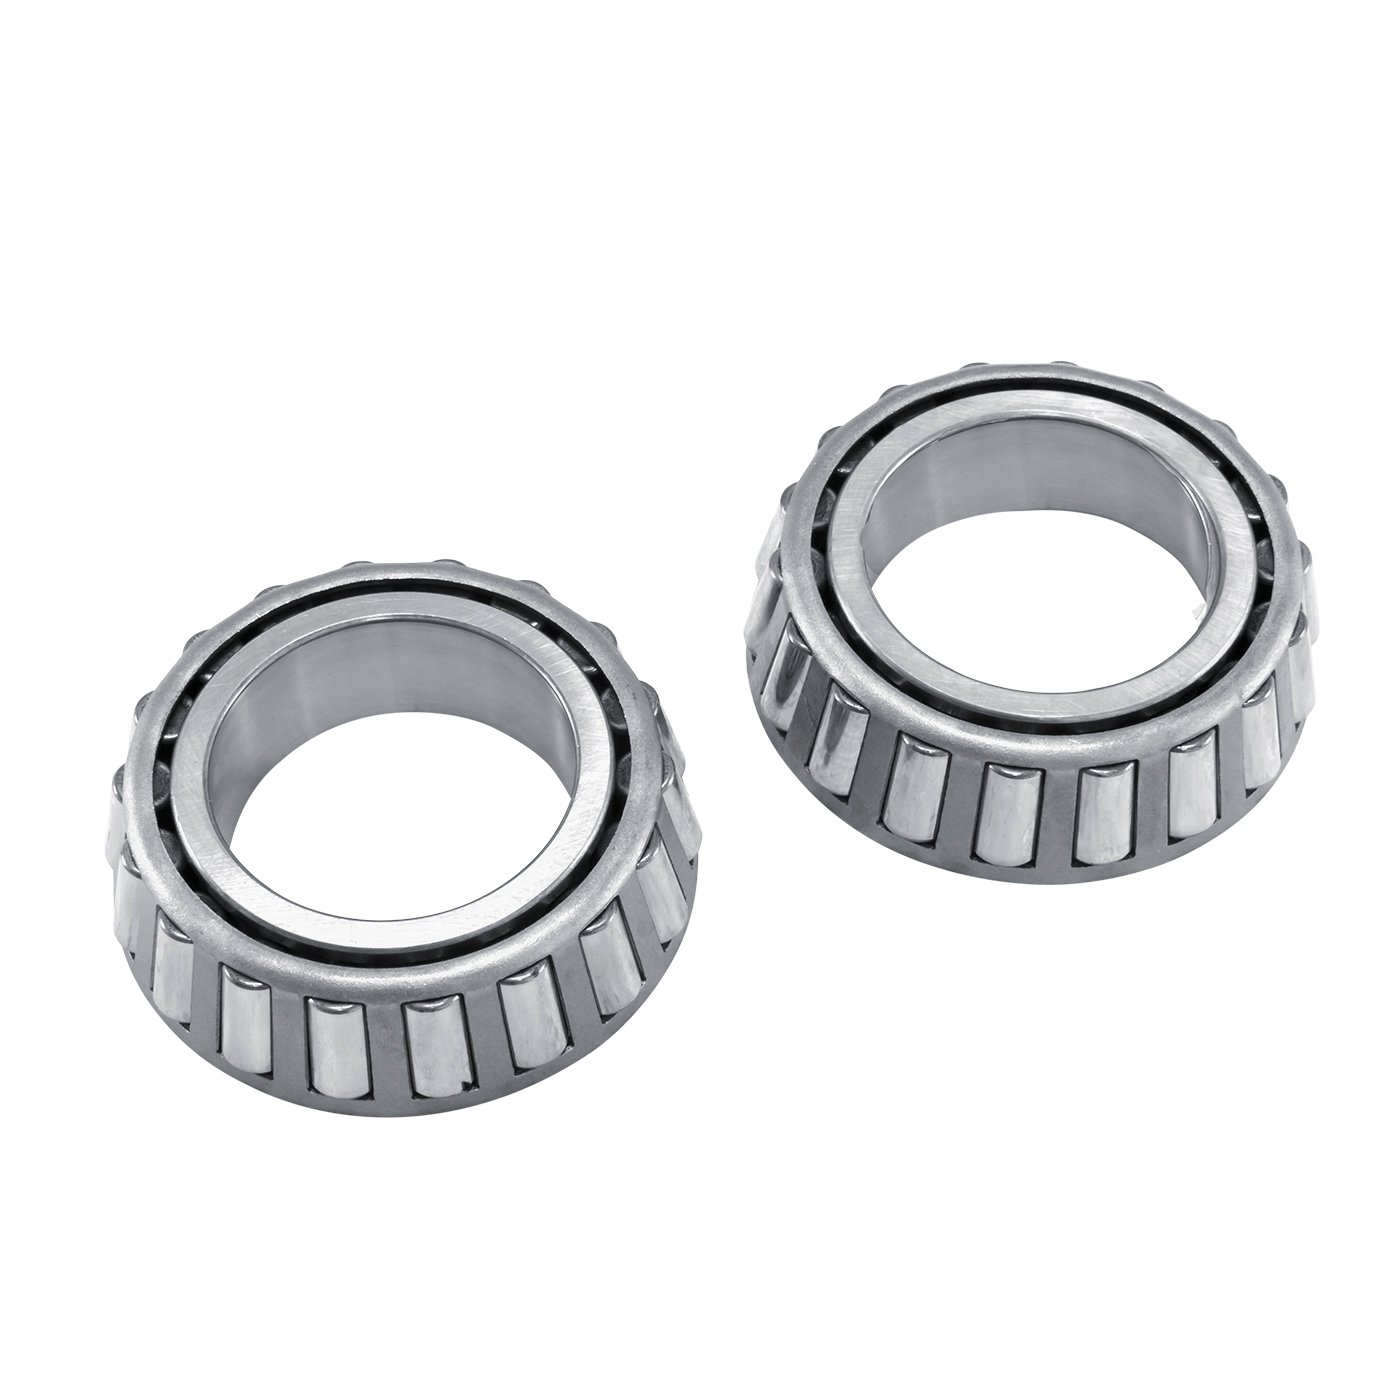 Carrier Setup Bearings For Dana 70Hd And Dana 80 Differentials